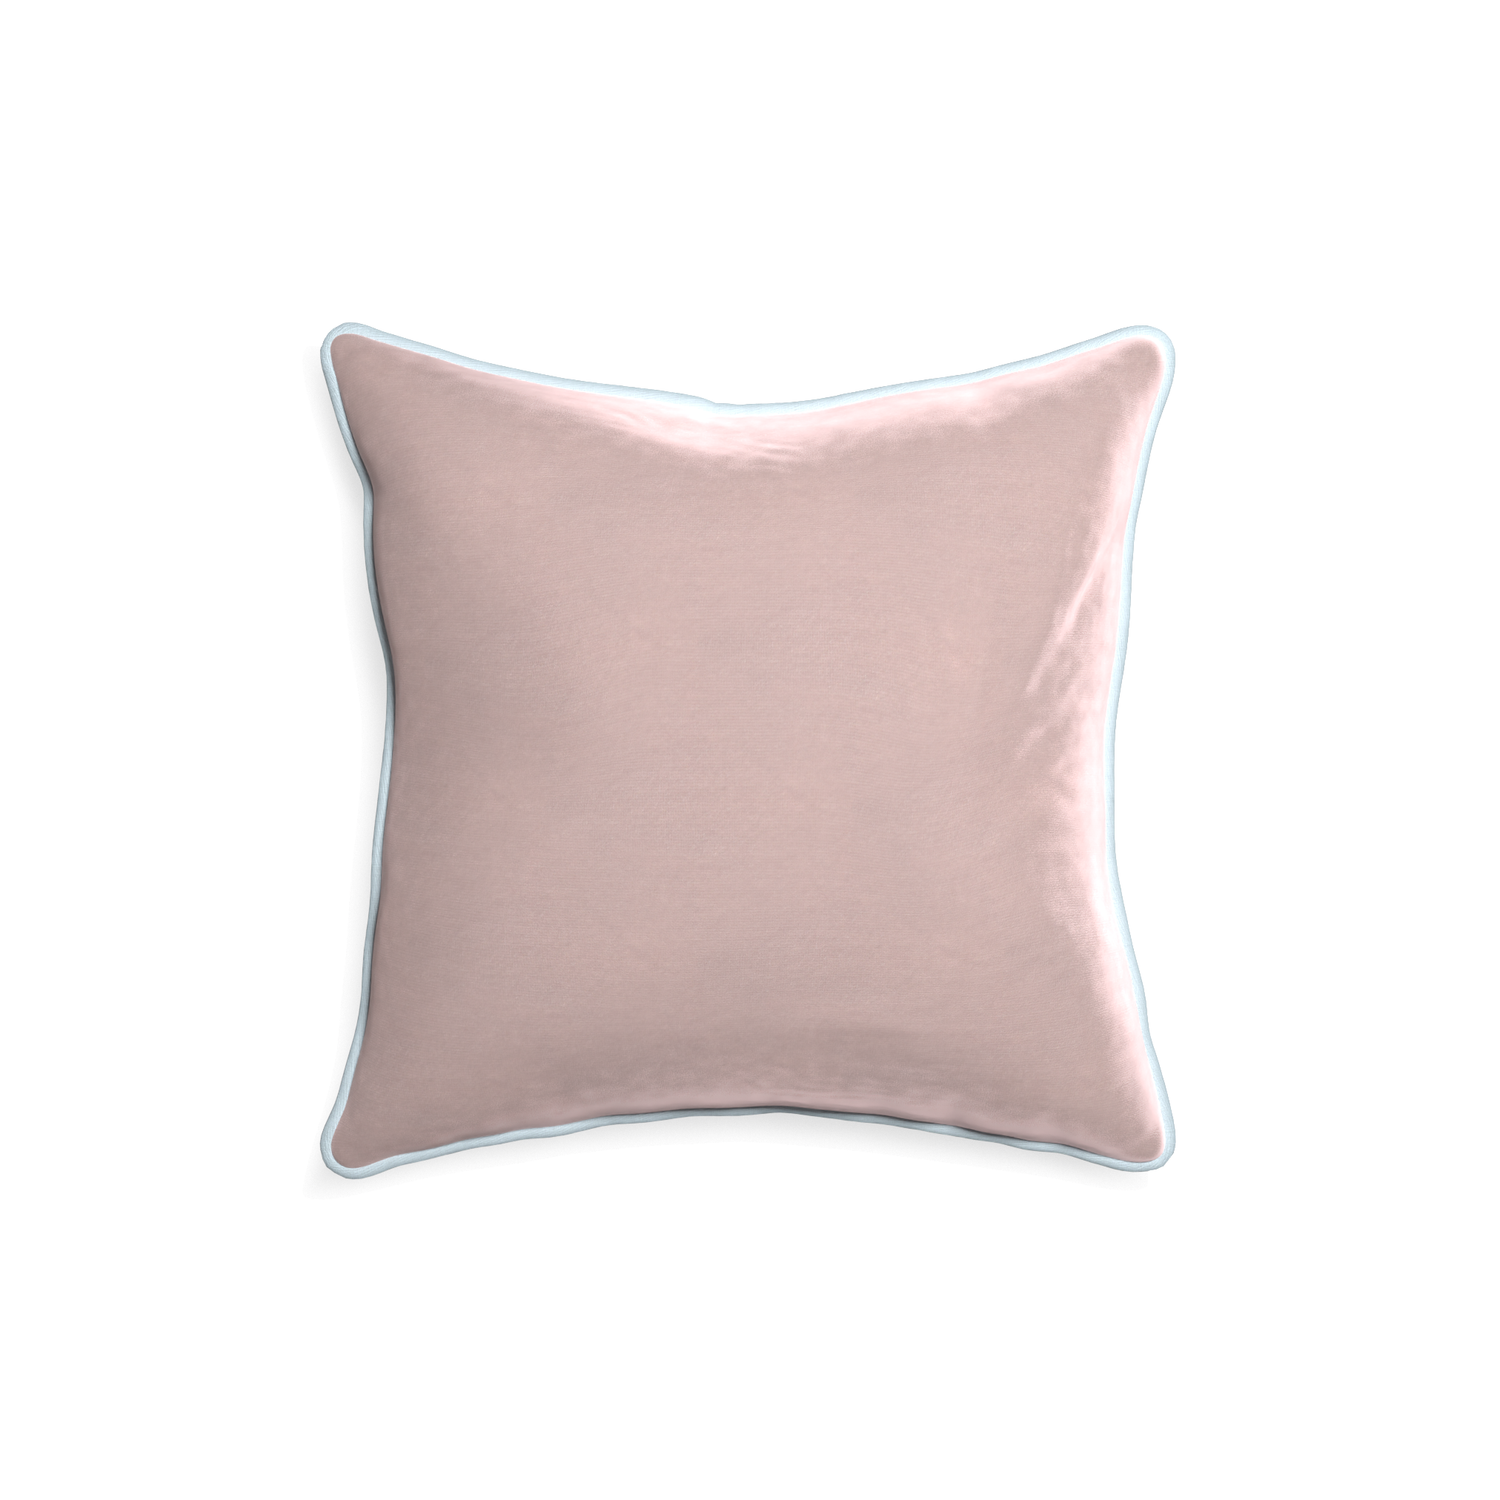 square light pink velvet pillow with light blue piping